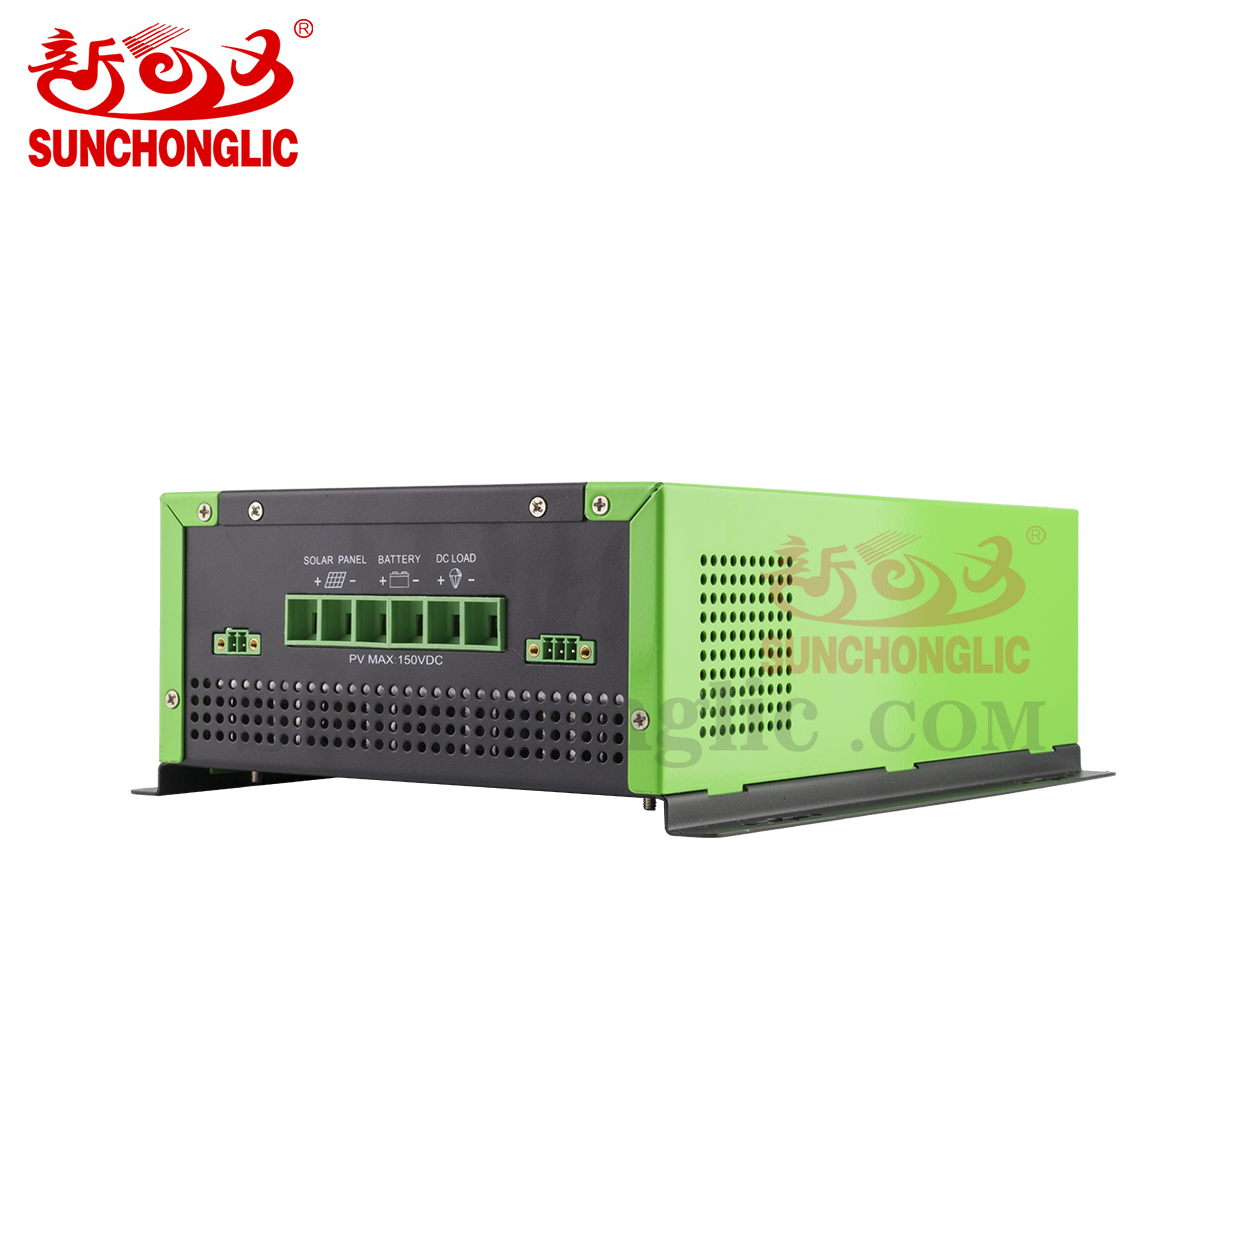 Solar Charge Controller - FT-MP-40A